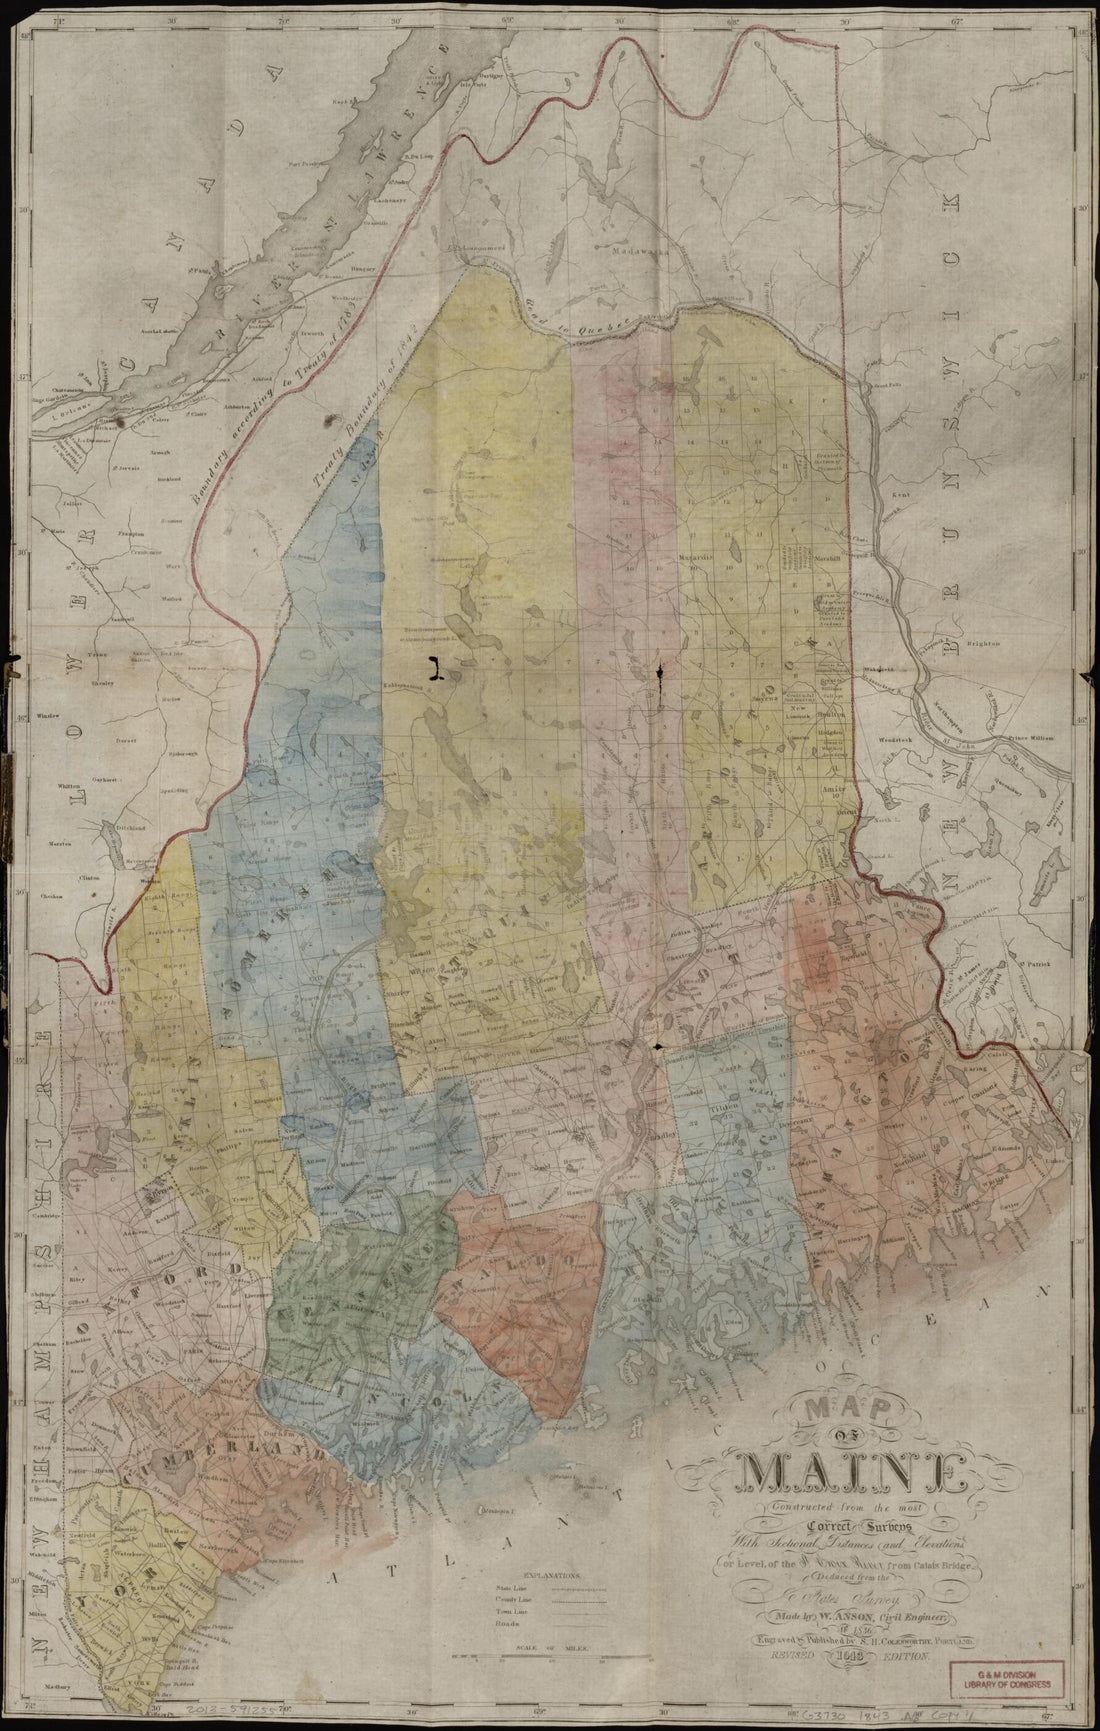 This old map of Map of Maine : Constructed from the Most Correct Surveys With Sectional Distances and Elevations, Or Level, of the St. Croix River from Calais Bridge Deduced from the States Survey from 1843 was created by W. Anson, Samuel Hodgson Coleswo